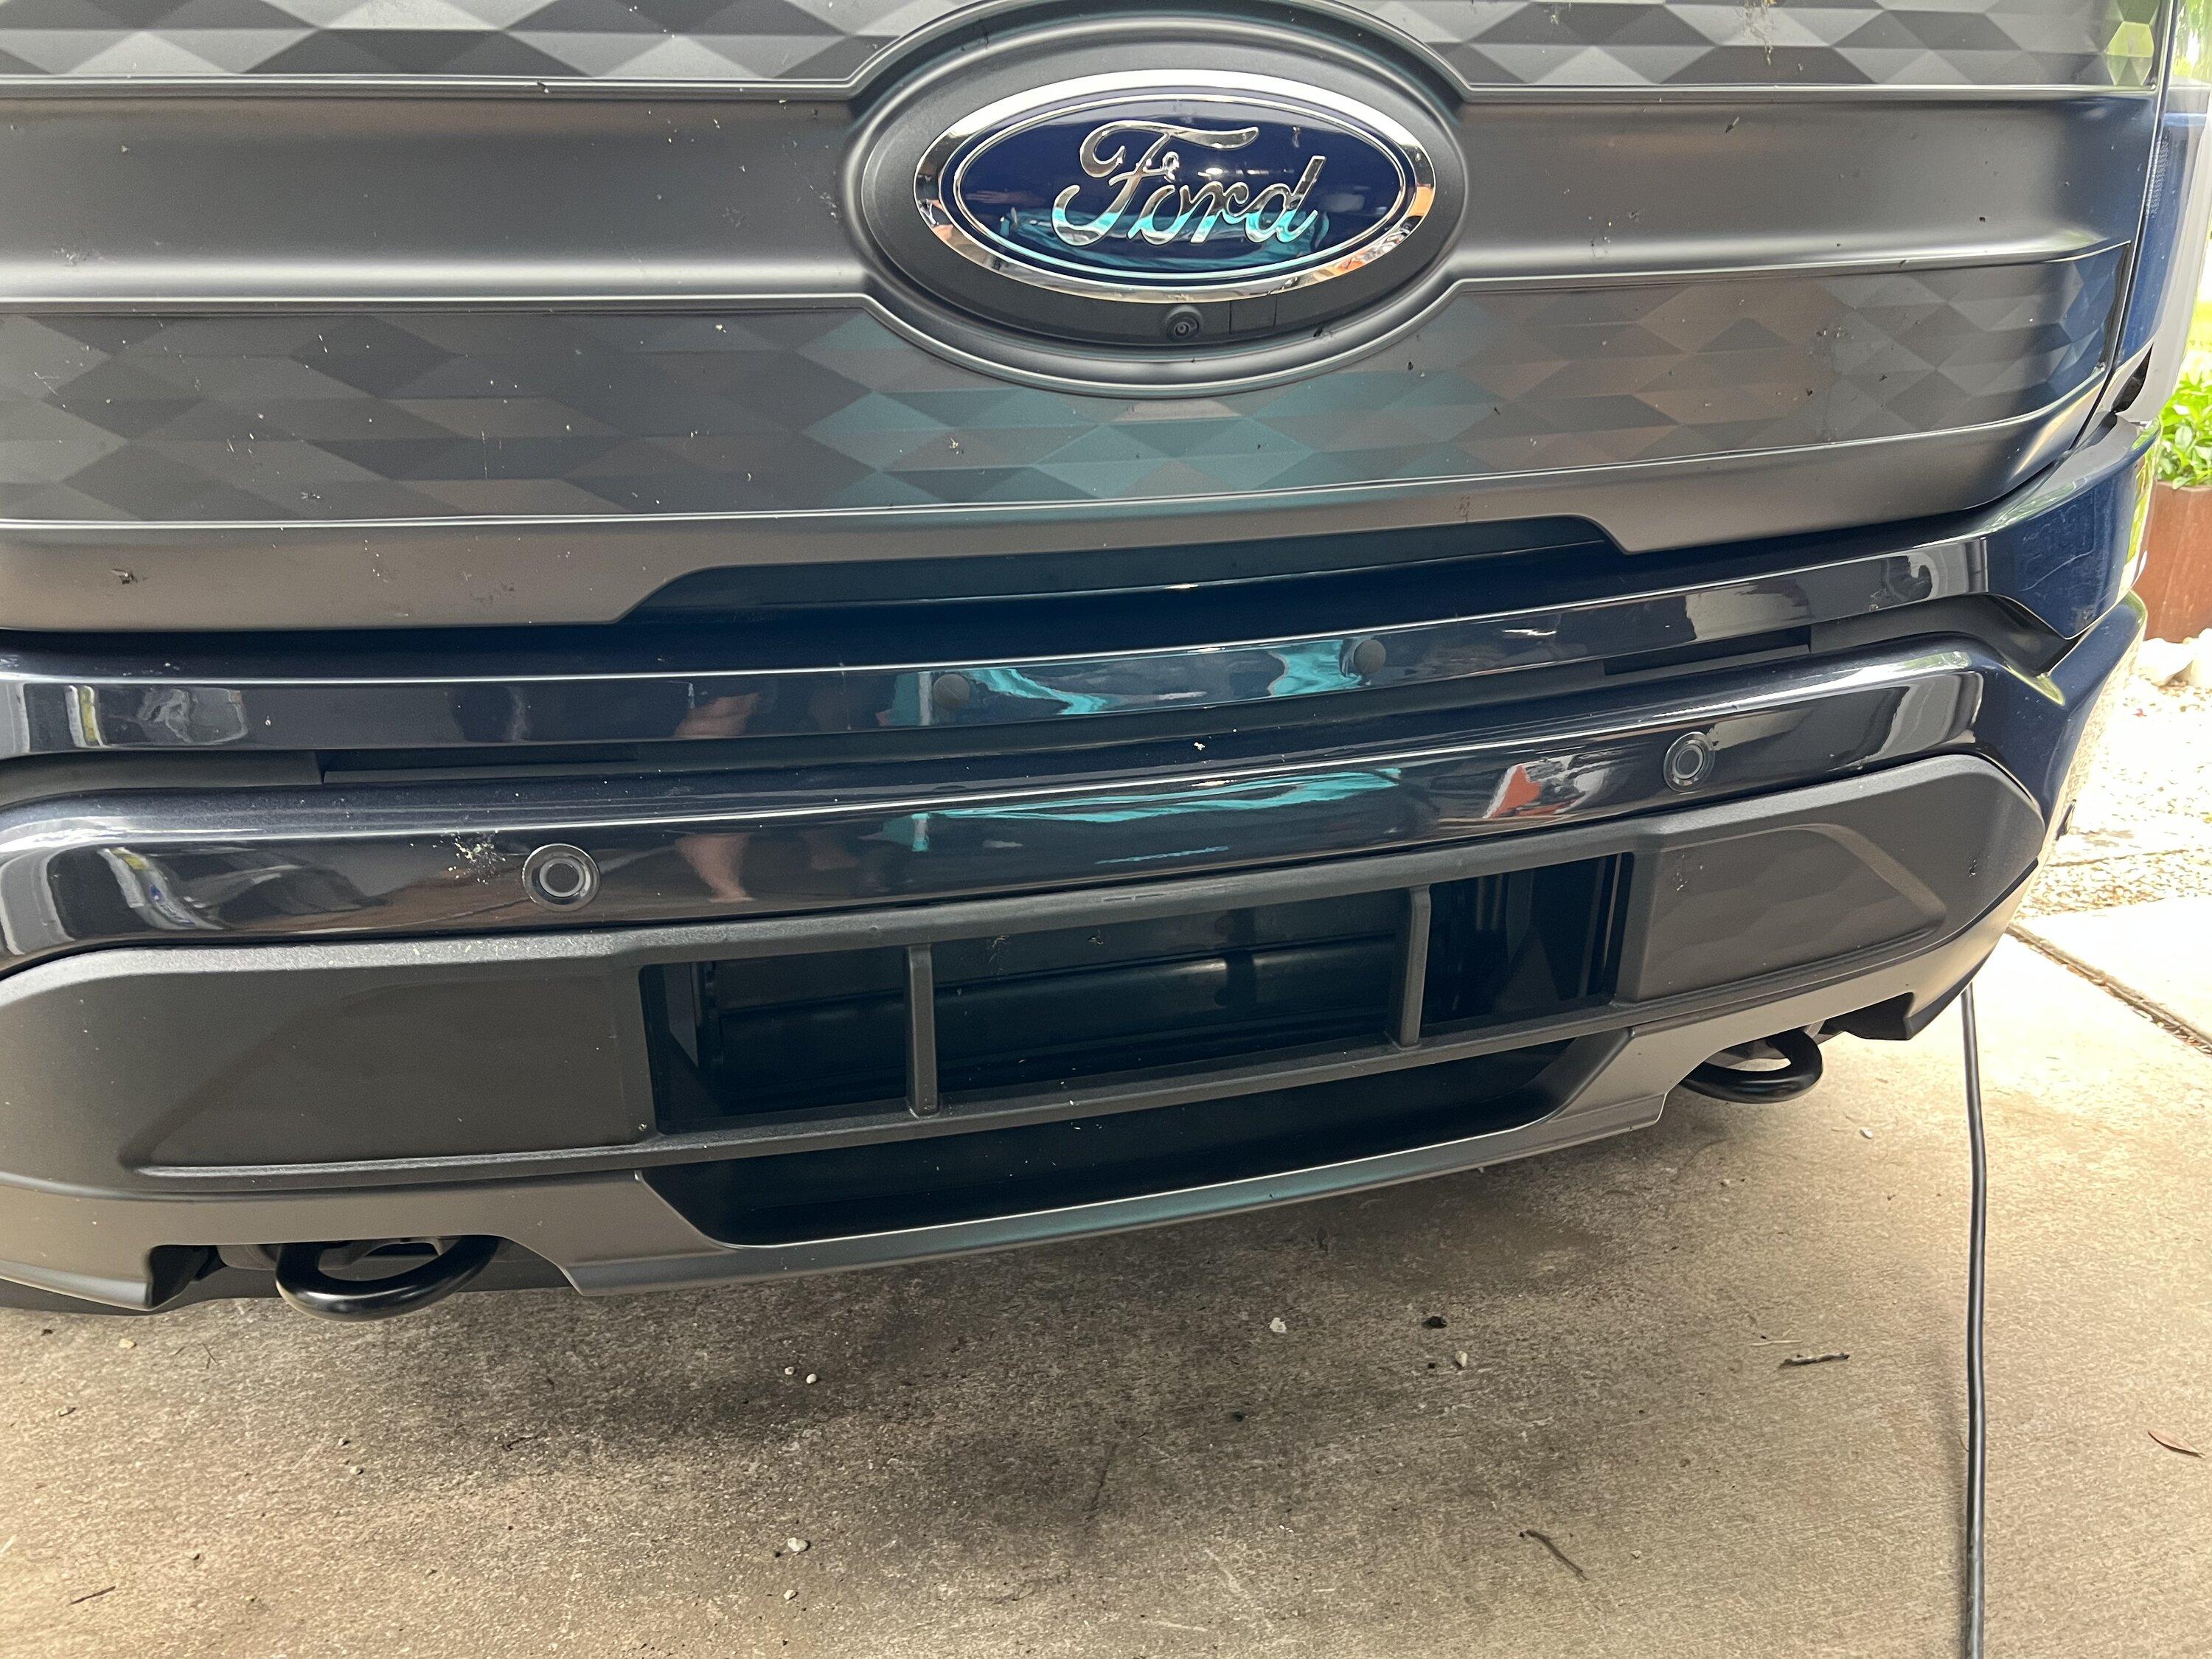 Relocate Front License Plate Holder.  Ford Lightning Forum For F-150  Lightning EV Pickup: News, Owners, Discussions, Community